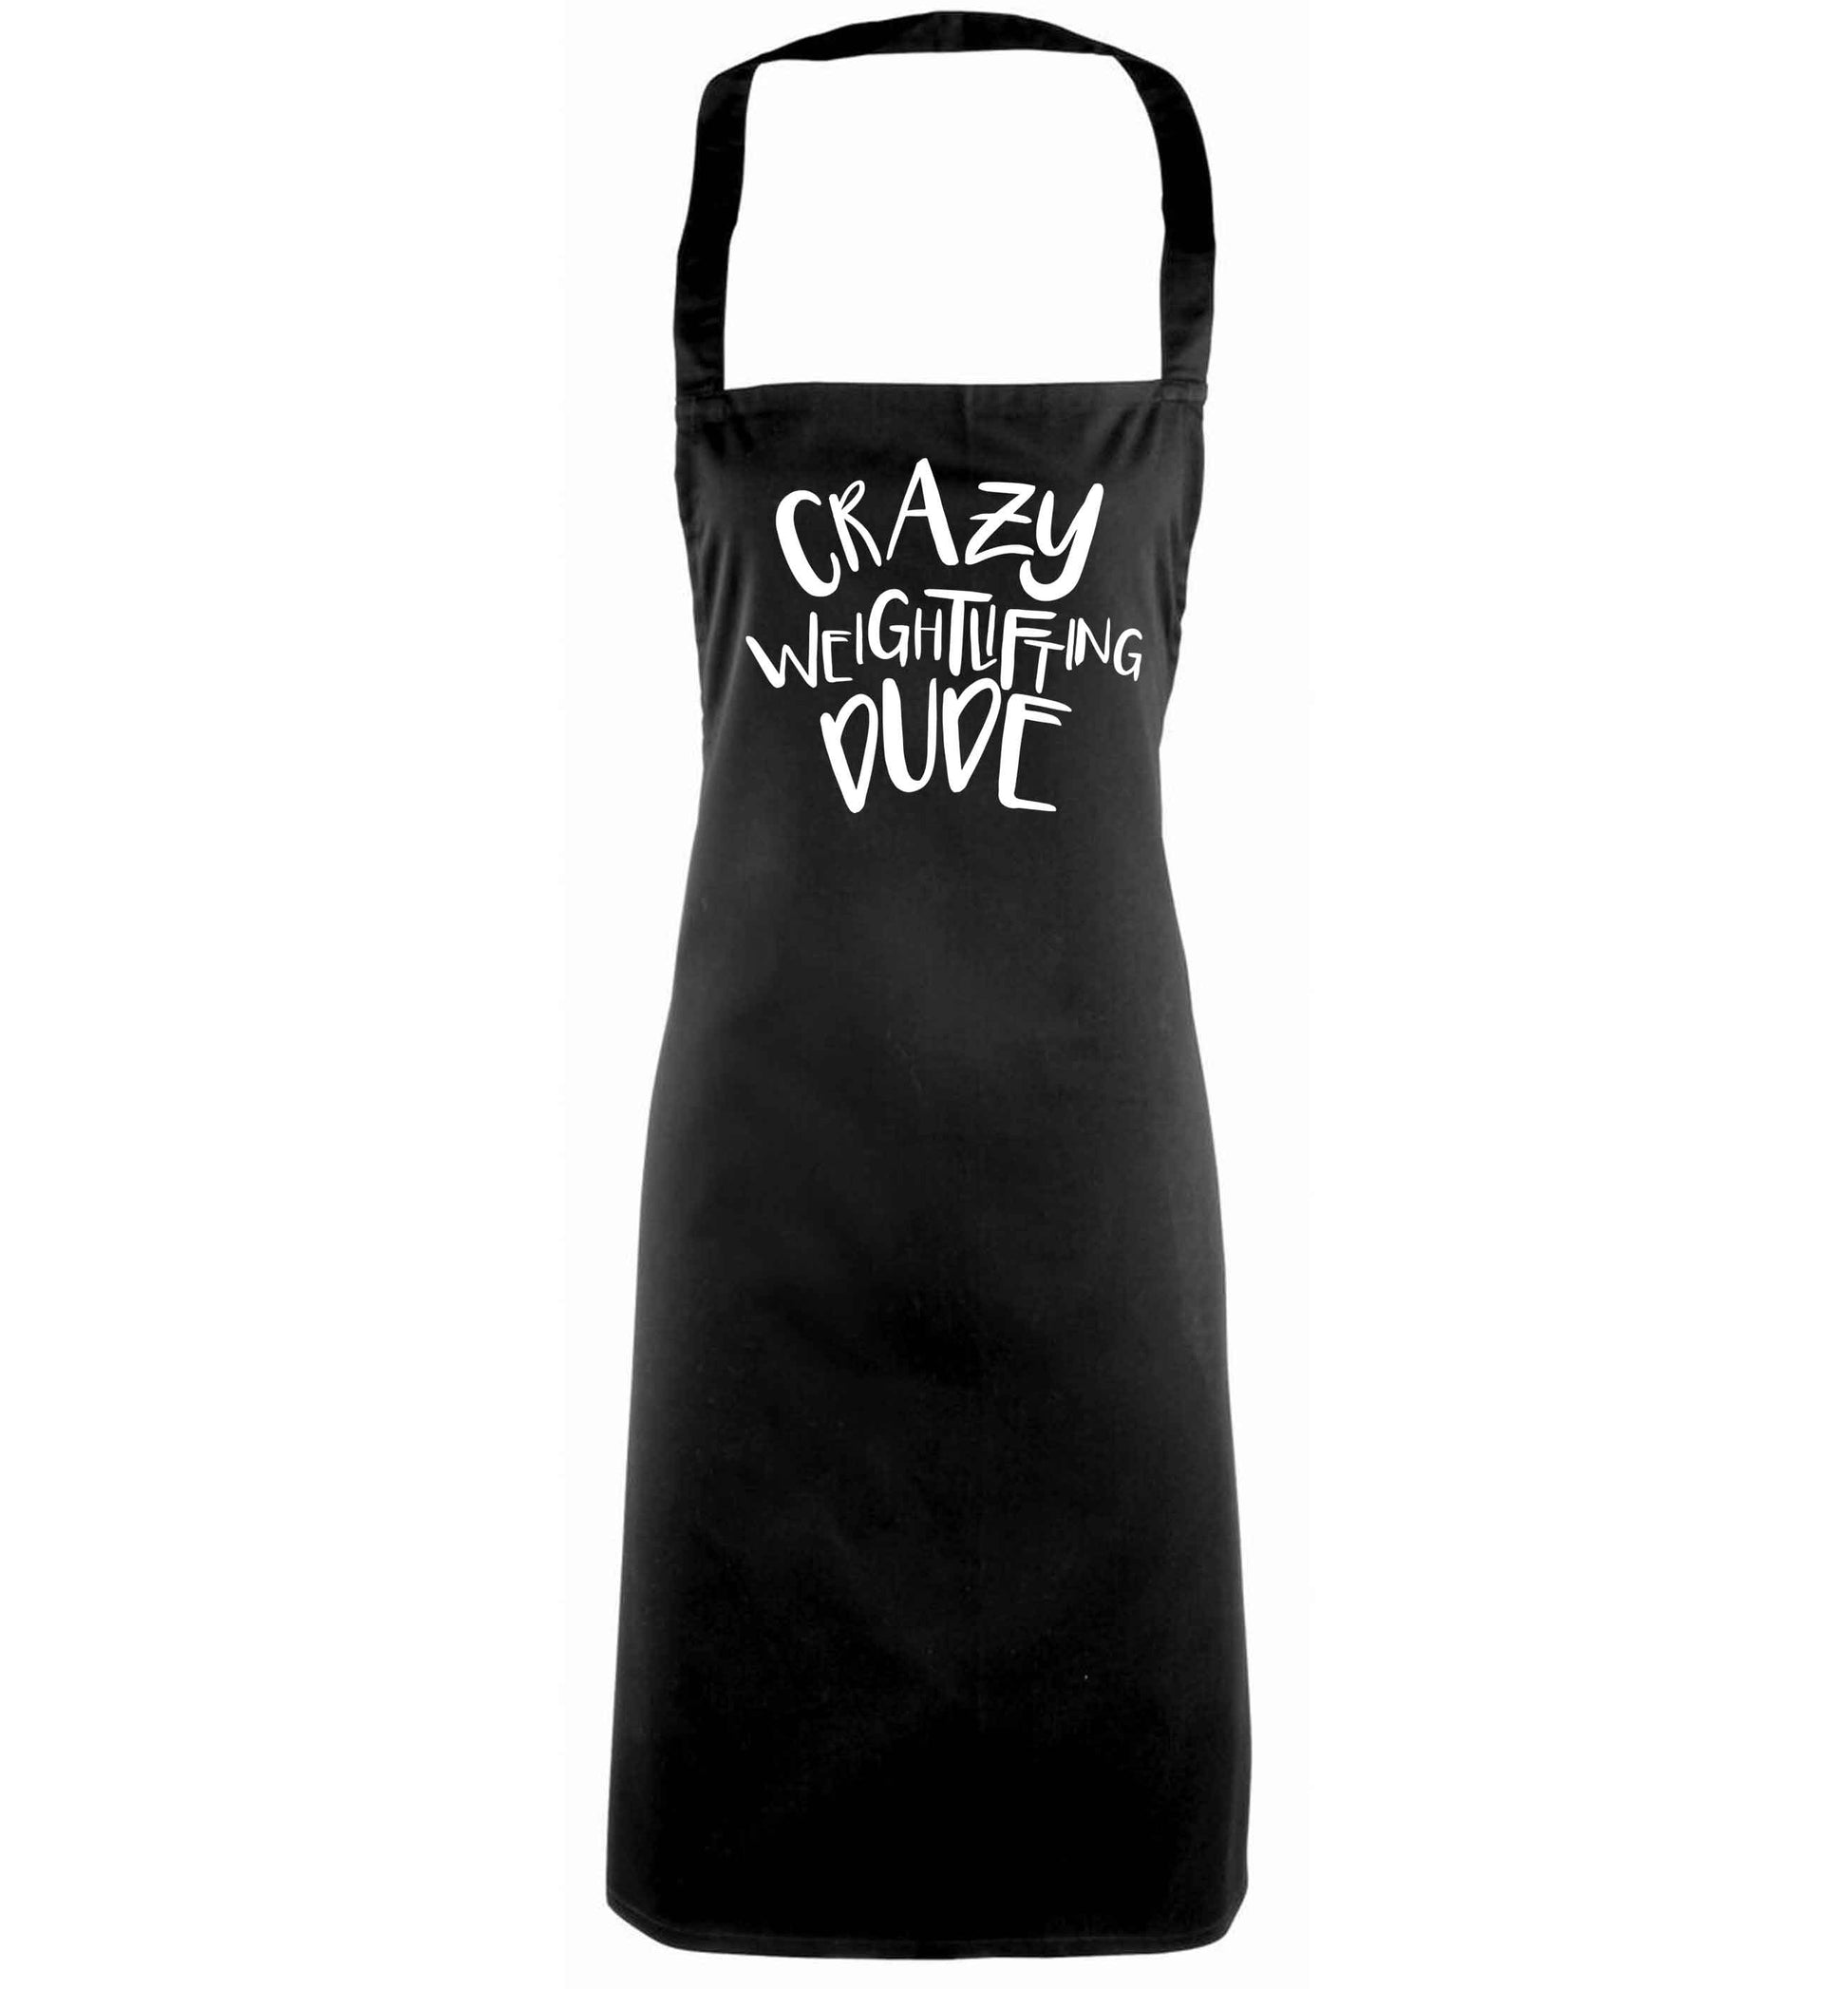 Crazy weightlifting dude black apron